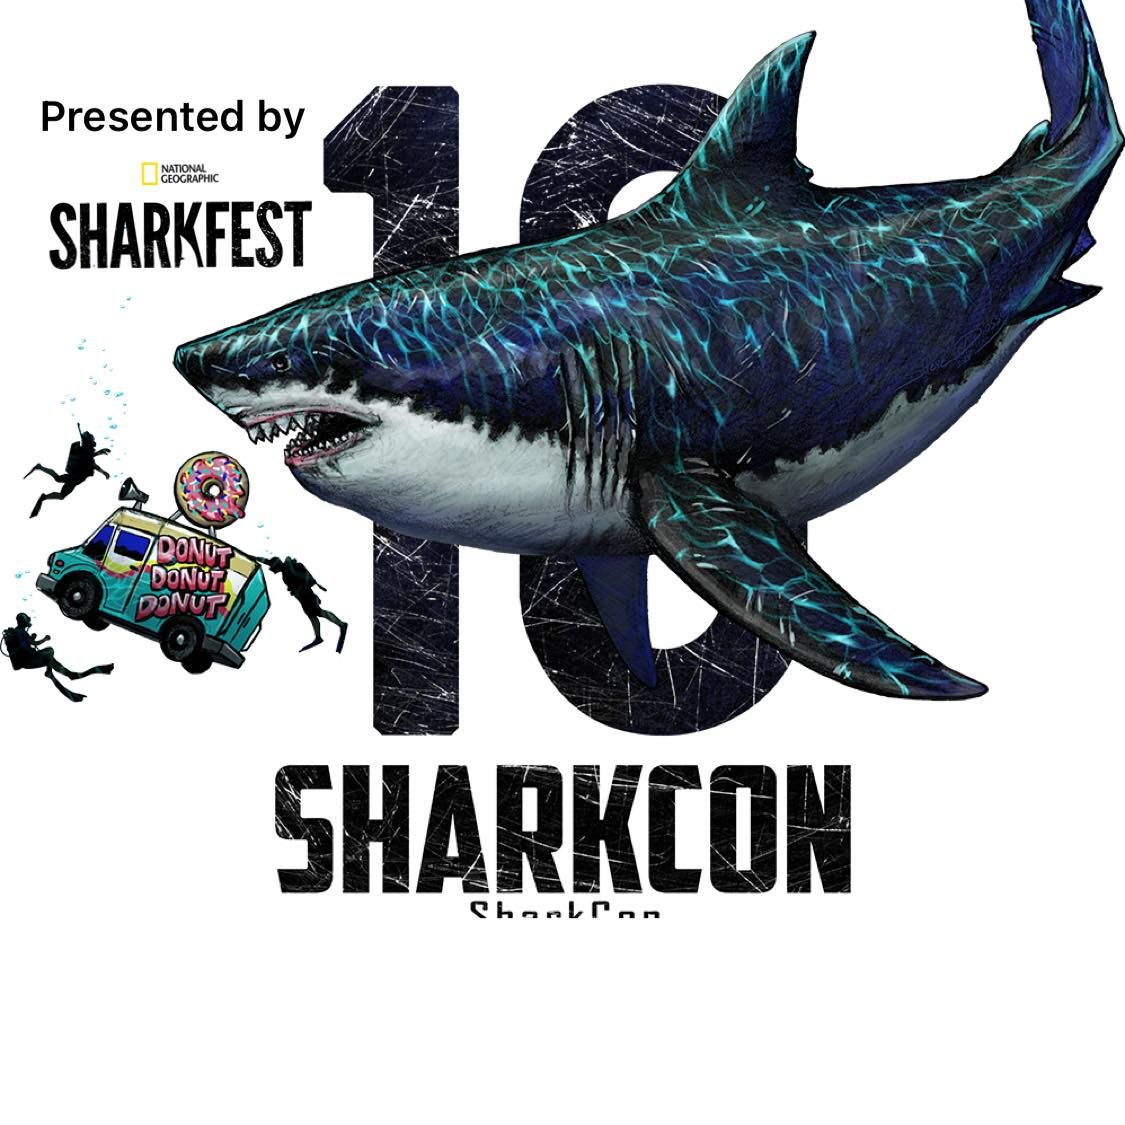 Presented by National Geographic SHARKFEST